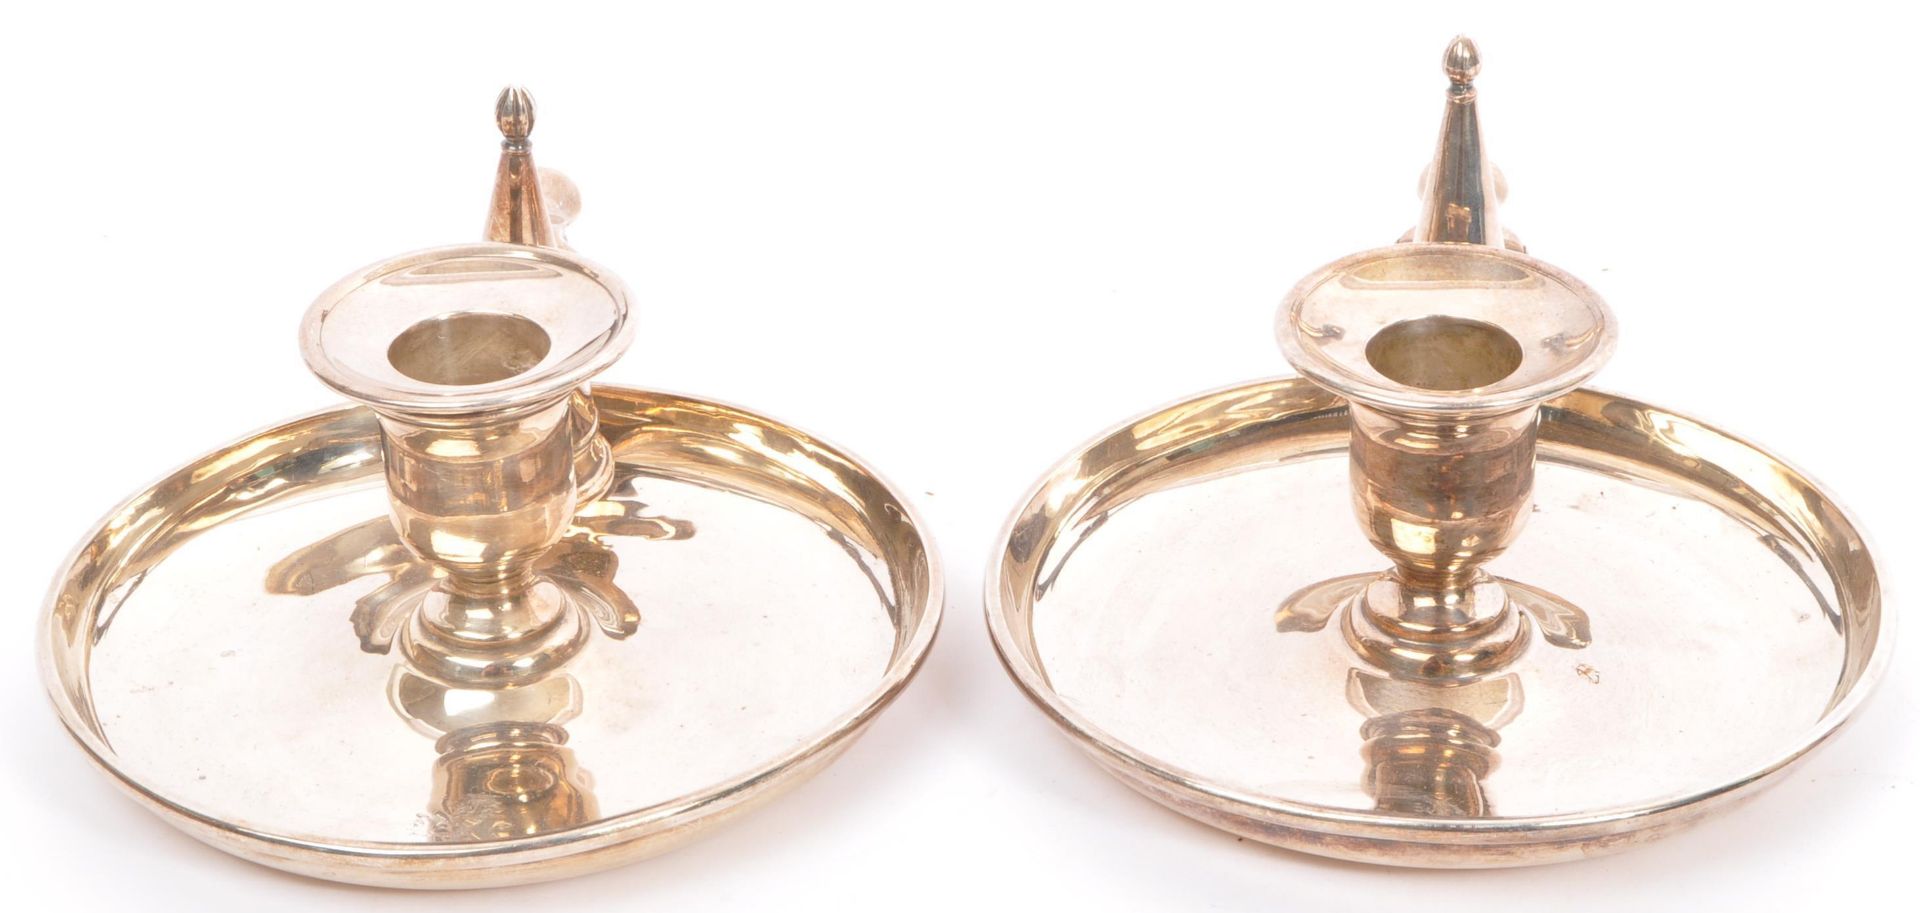 PAIR OF EARLY 20TH CENTURY SILVER PLATED CHAMBERS CANDLE STICKS - Image 3 of 7